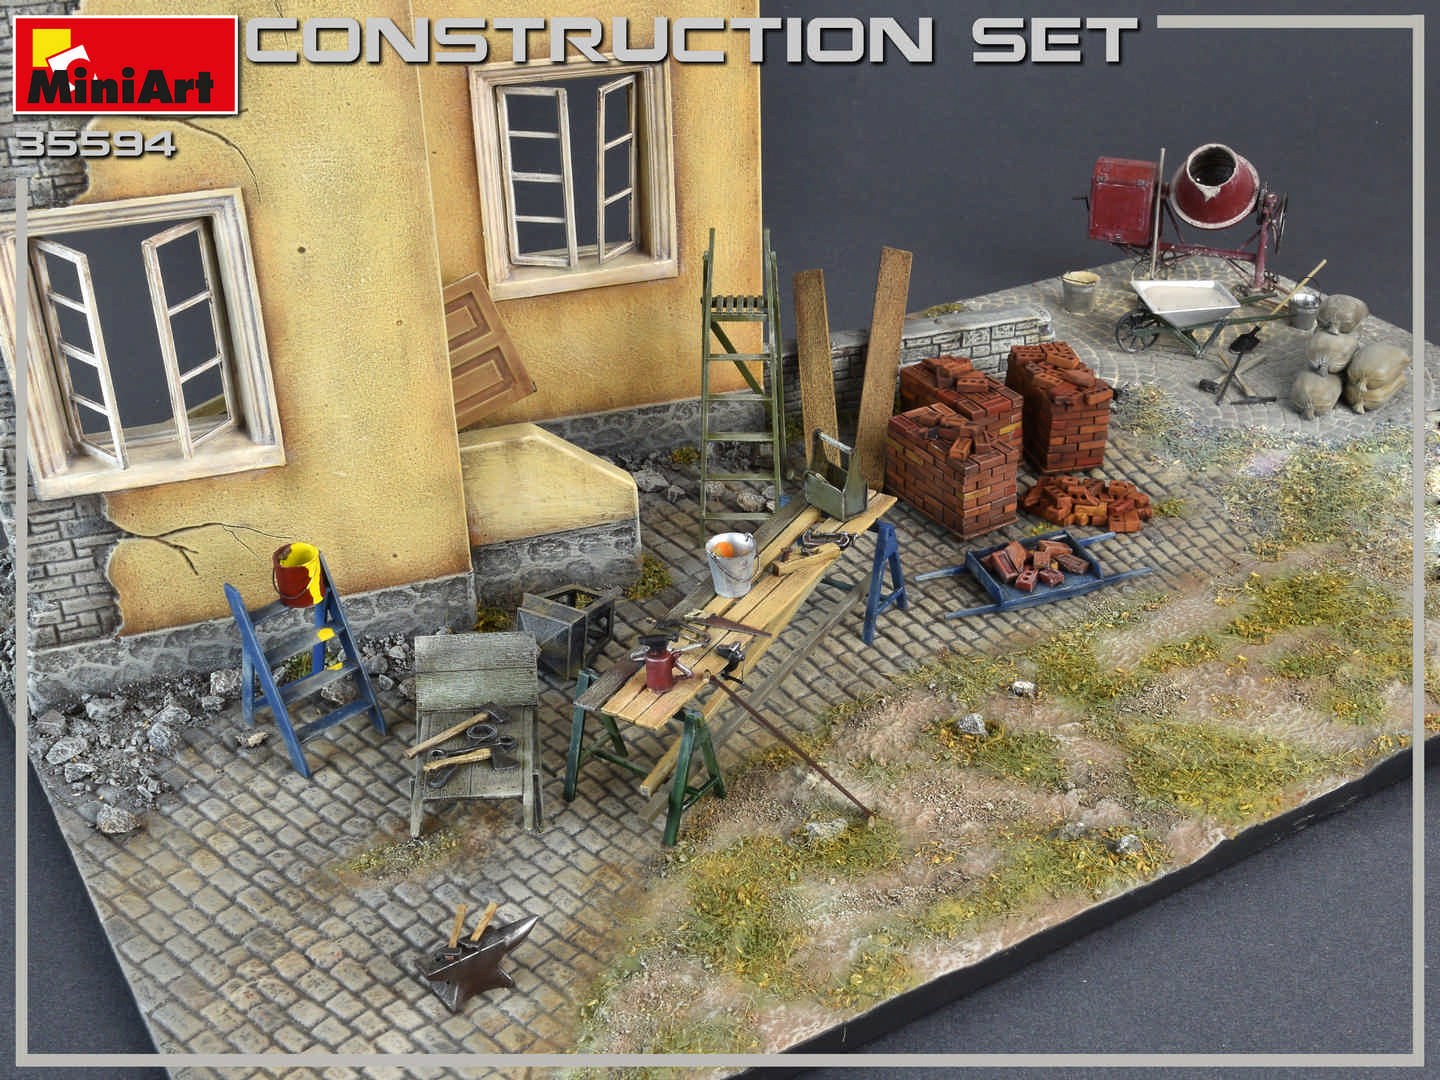 Buildings and Accessories Collection 1/35 Scale Model Kit MiniArt 35594 Construction Set